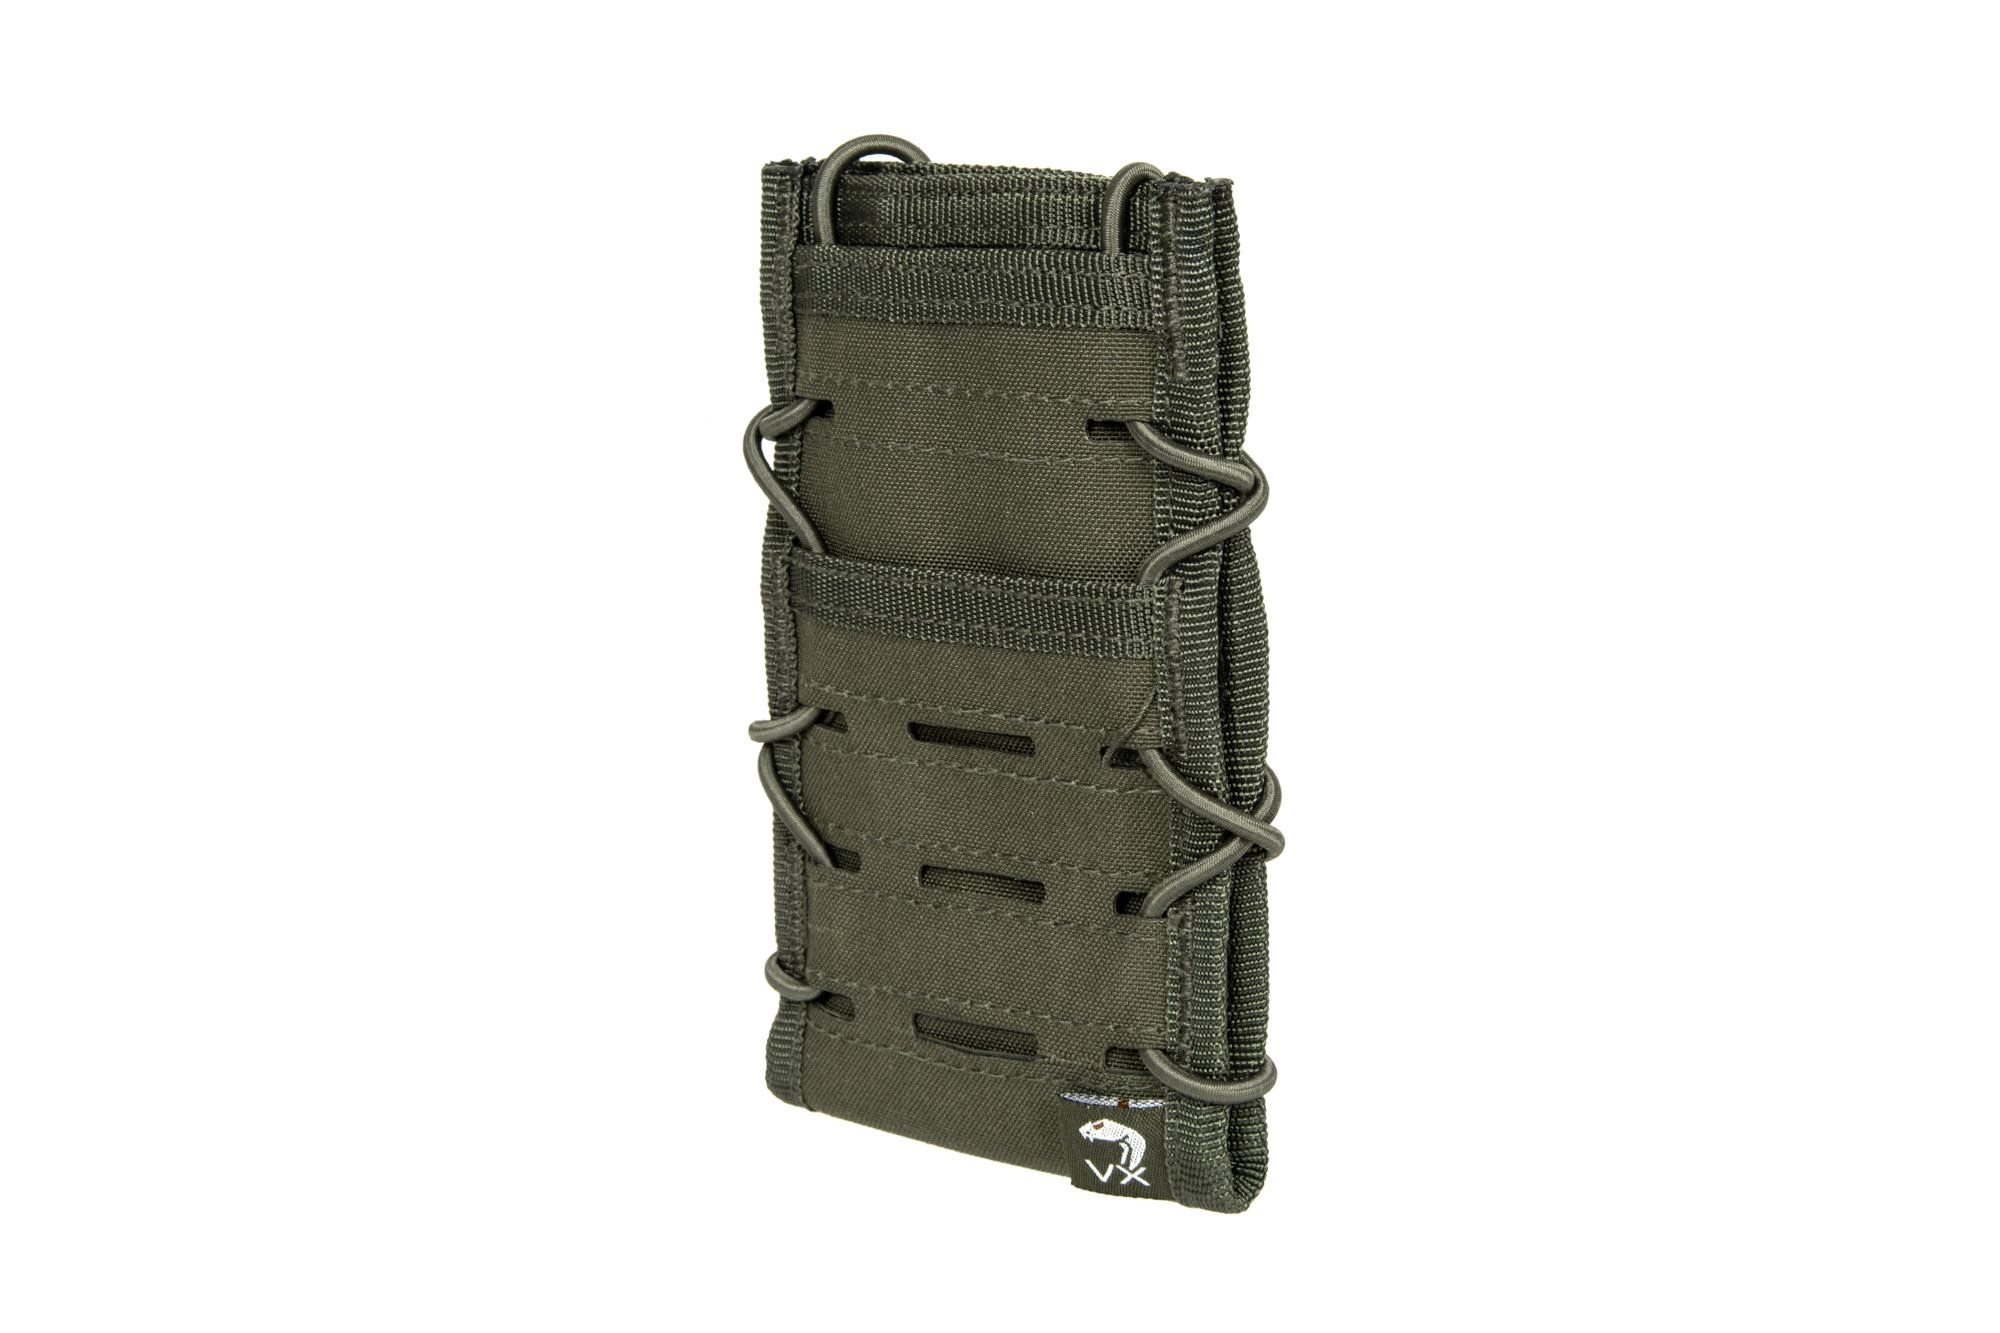 VX Smart Phone Pouch - Olive Drab